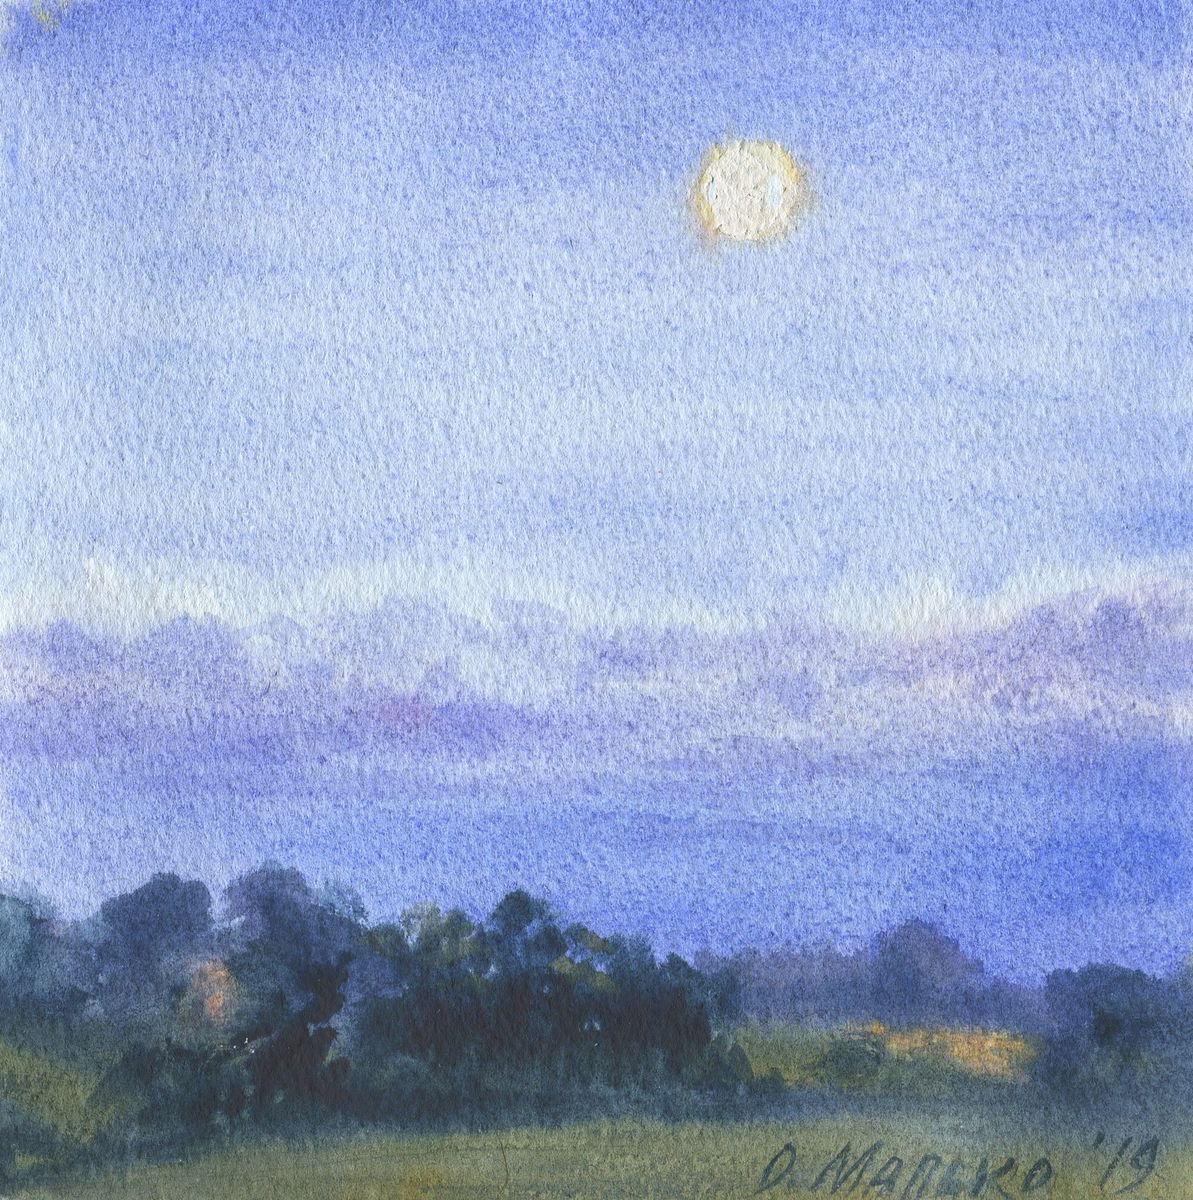 Moon clouds / Night sky Watercolor landscape by Olha Malko